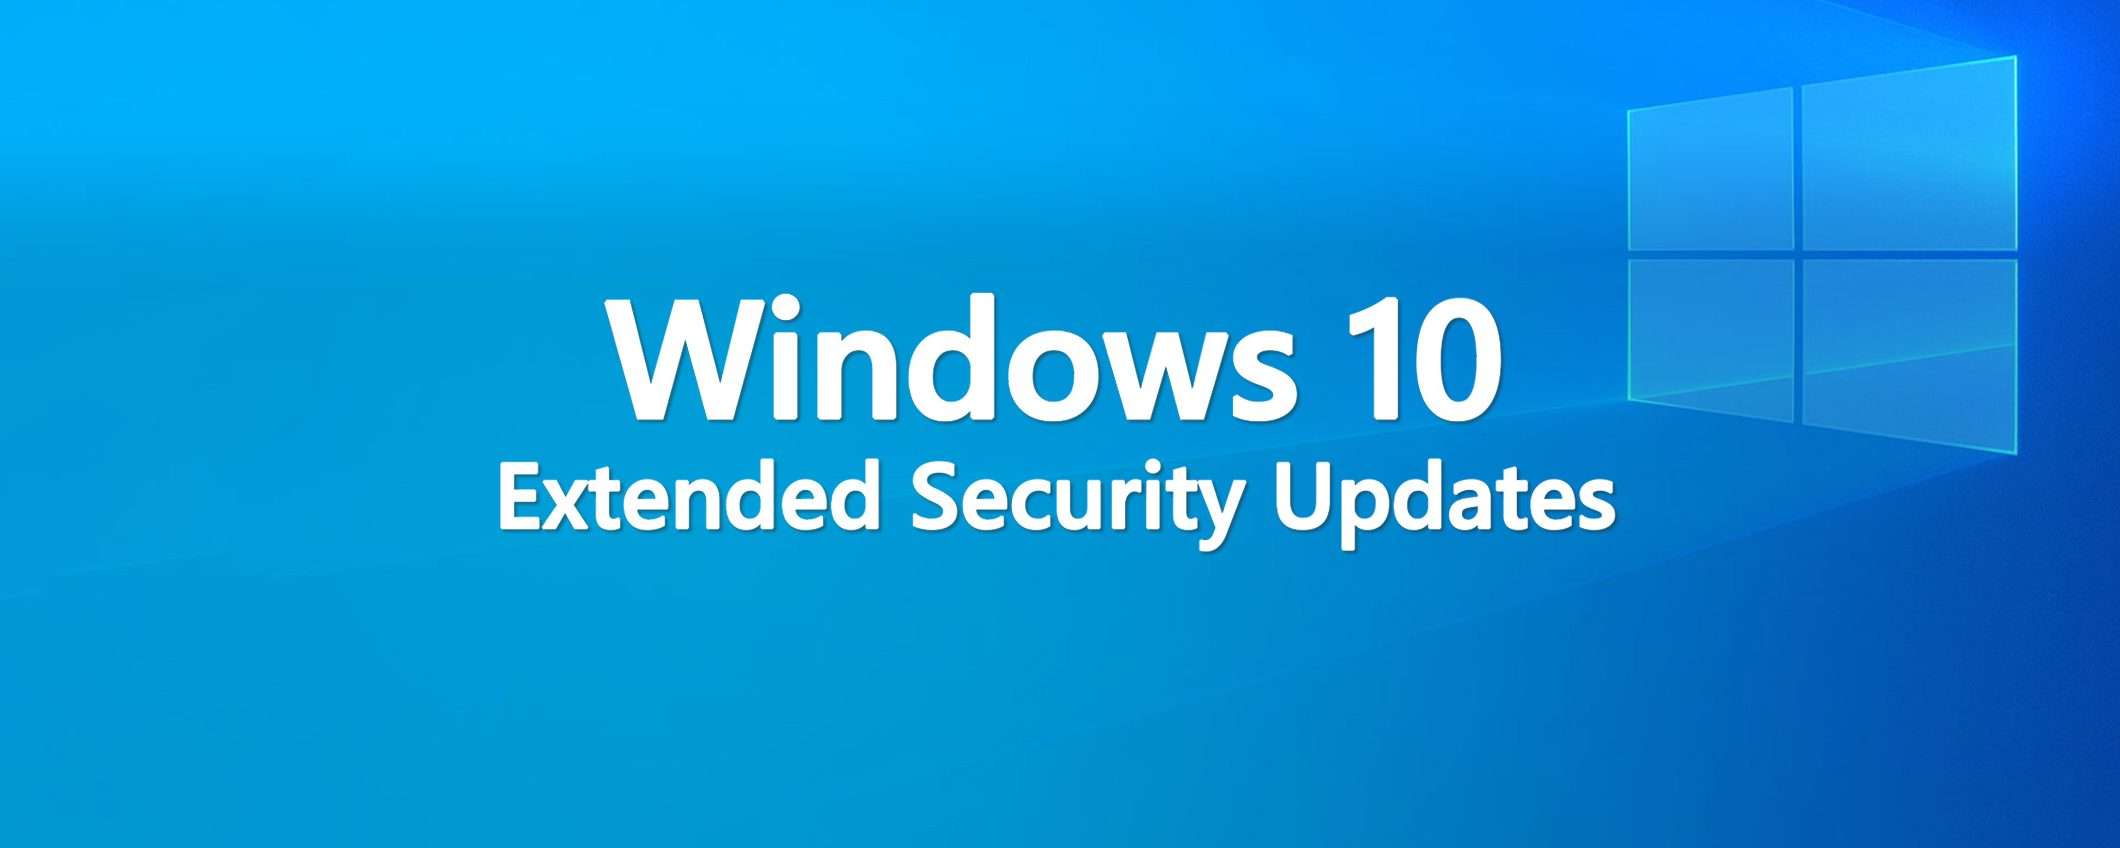 Windows 10 Extended Security Updates: il prezzo (update)